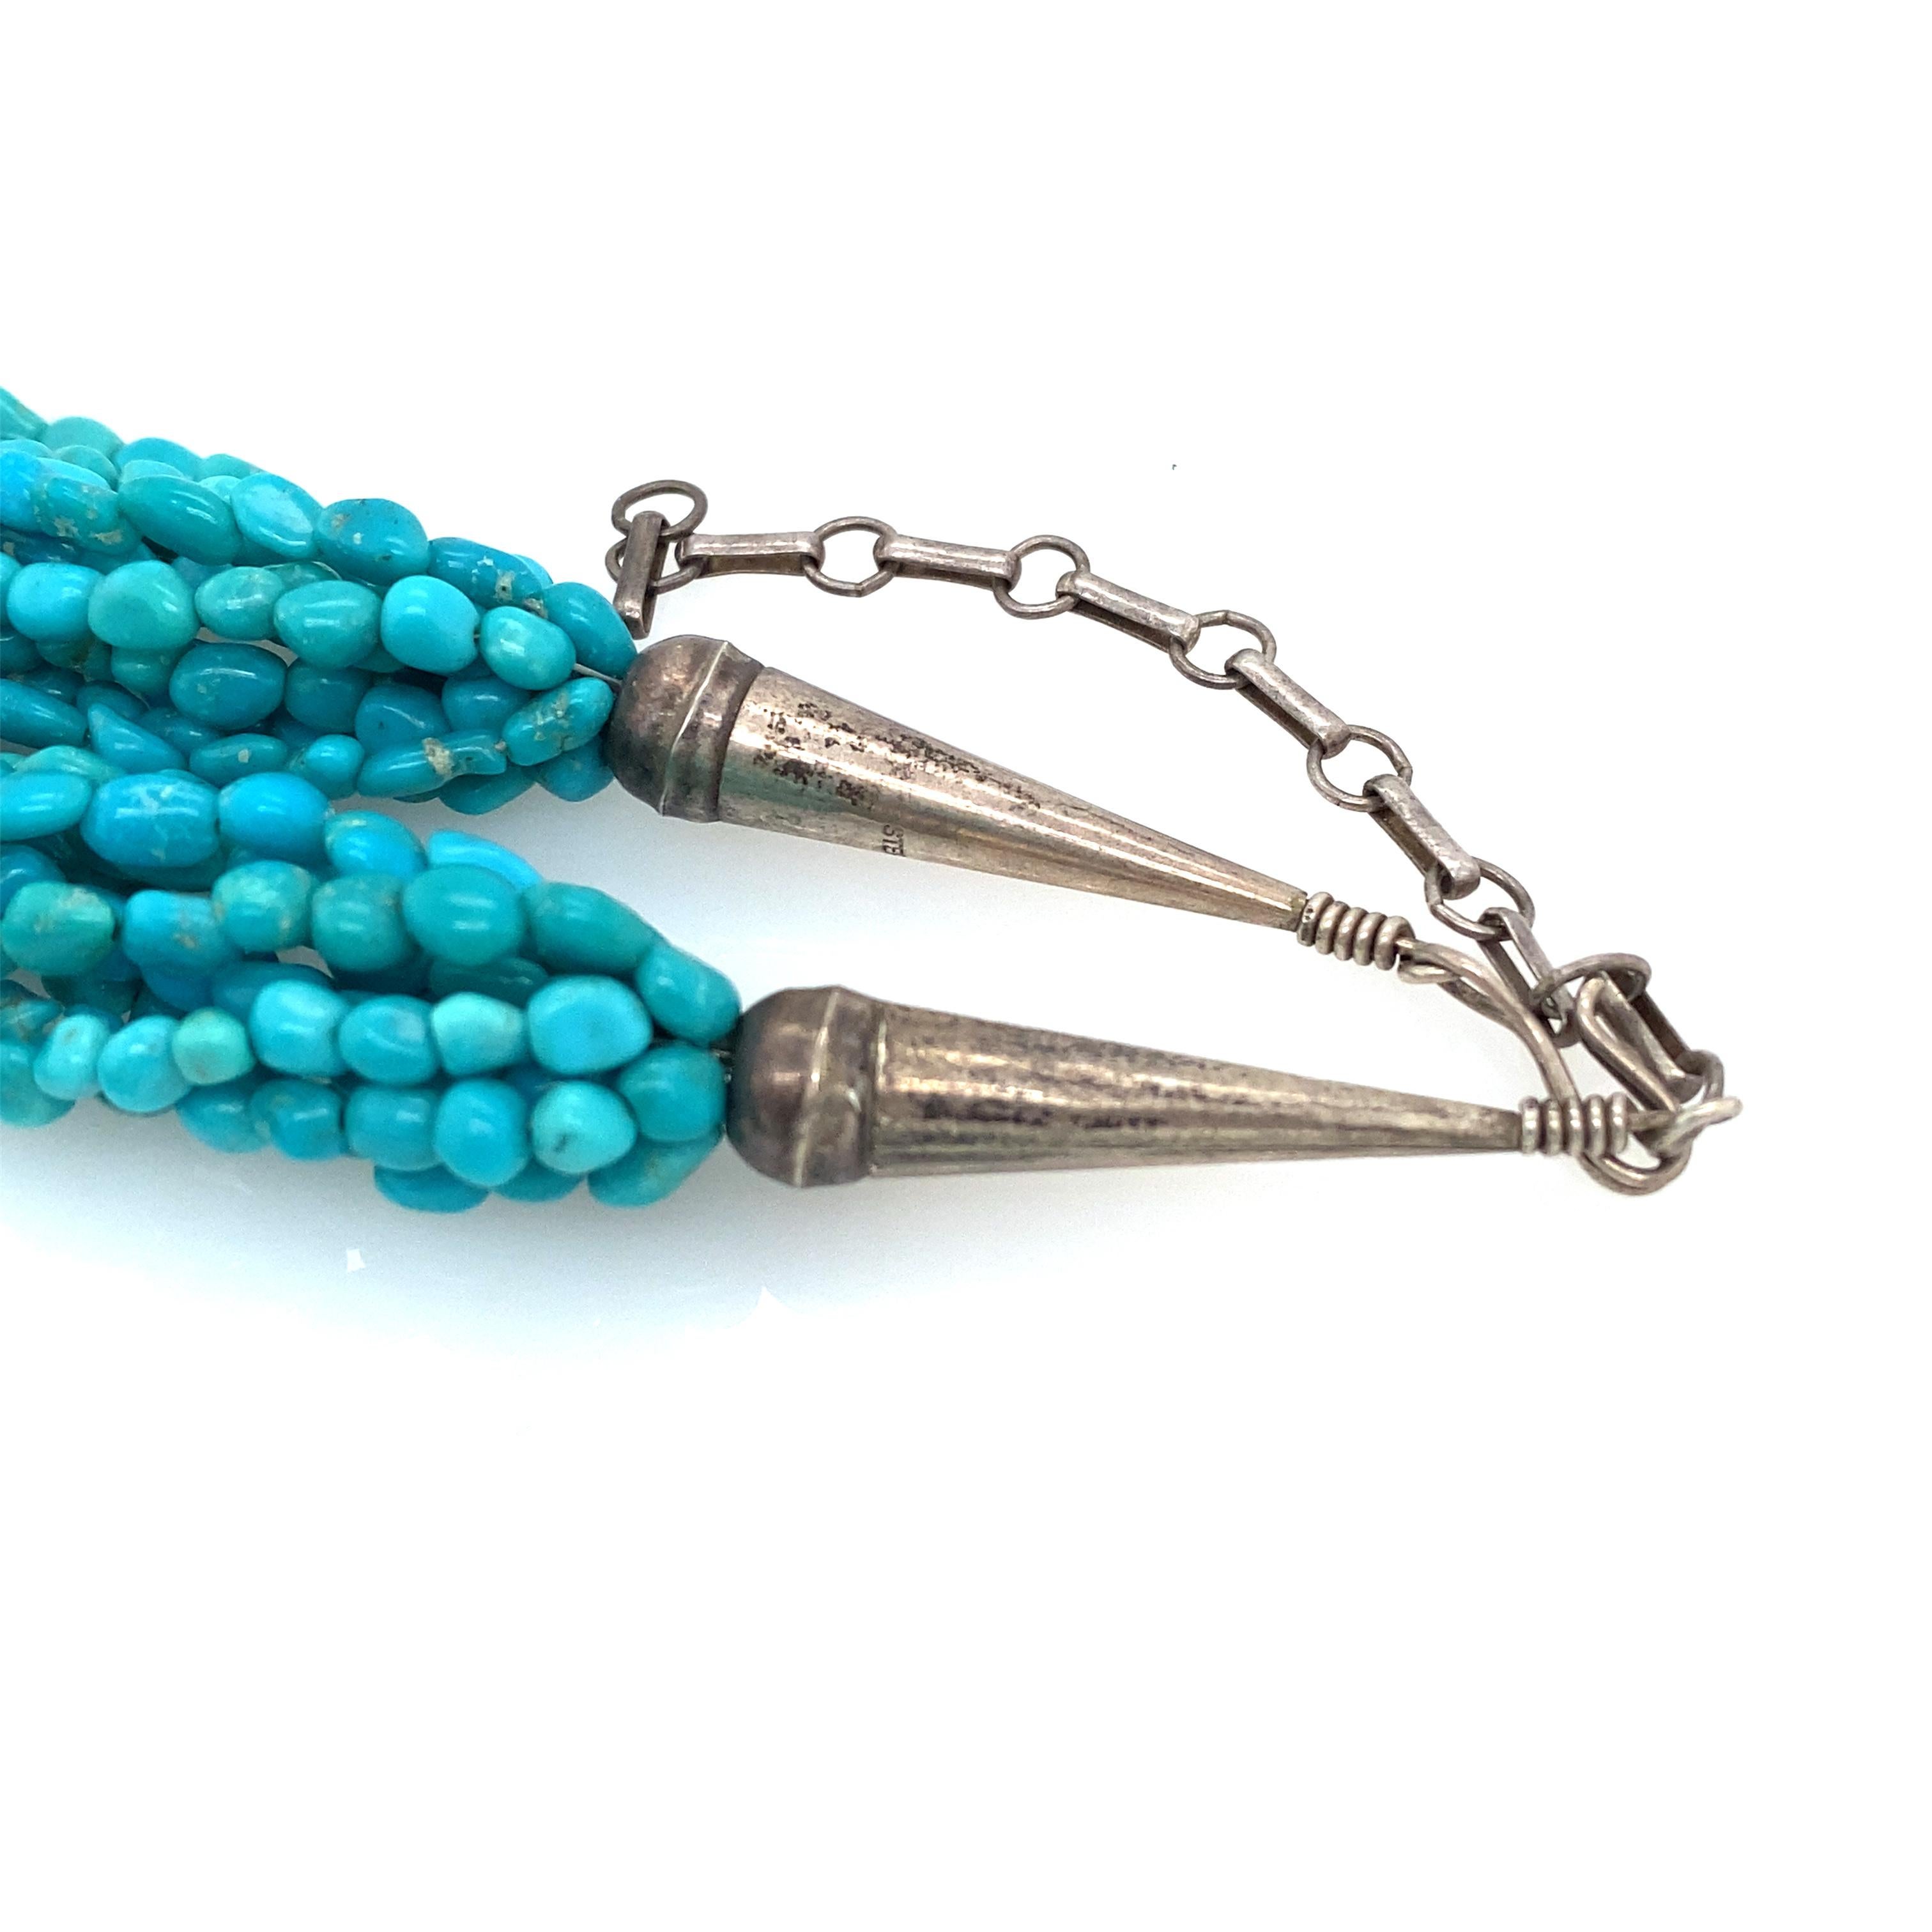 Bead Southwestern Multi Strand Turquoise Necklace in Sterling Silver